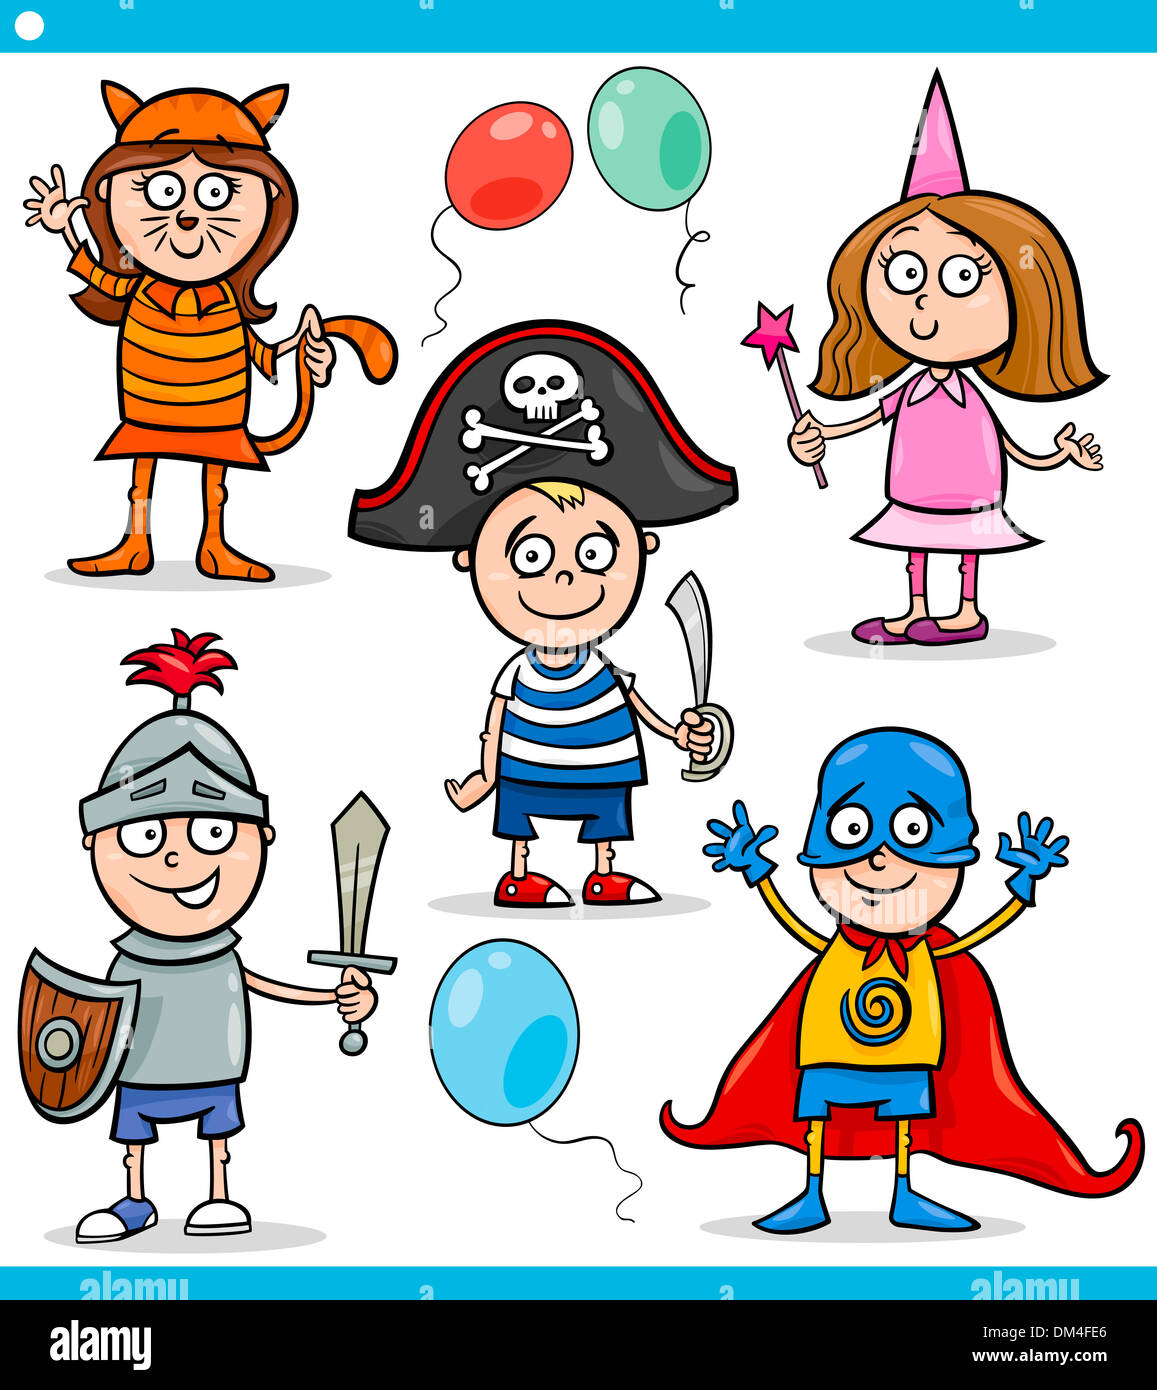 Cartoon Illustration of Cute Children in Fancy Ball Costumes Characters Set  Stock Photo - Alamy